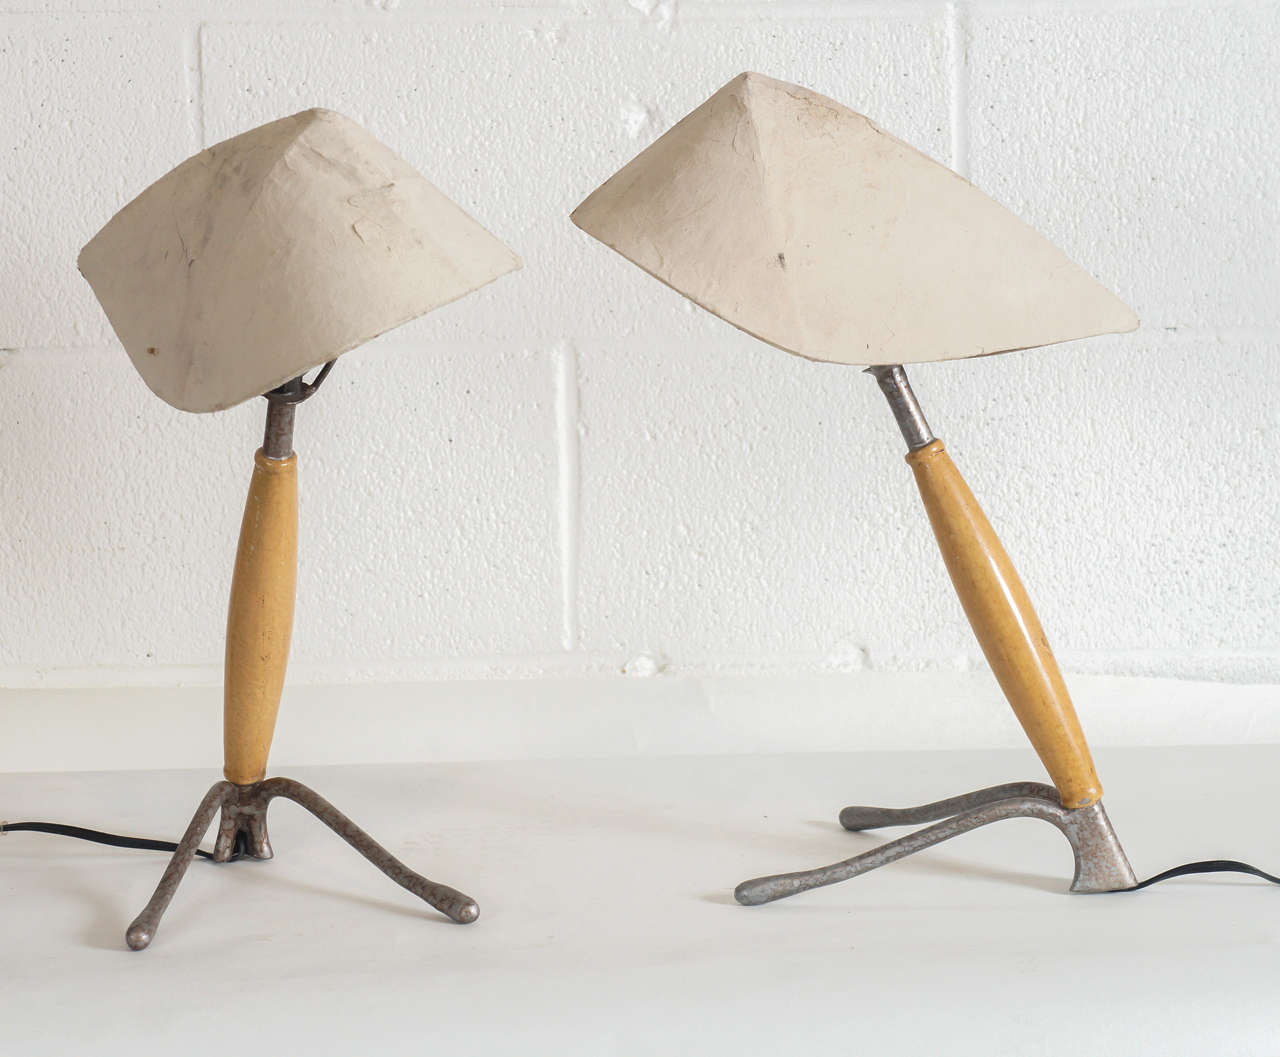 Here is a unique pair of lamps with papier mache shades.
The base is steel with a painted finish and has wood surround.